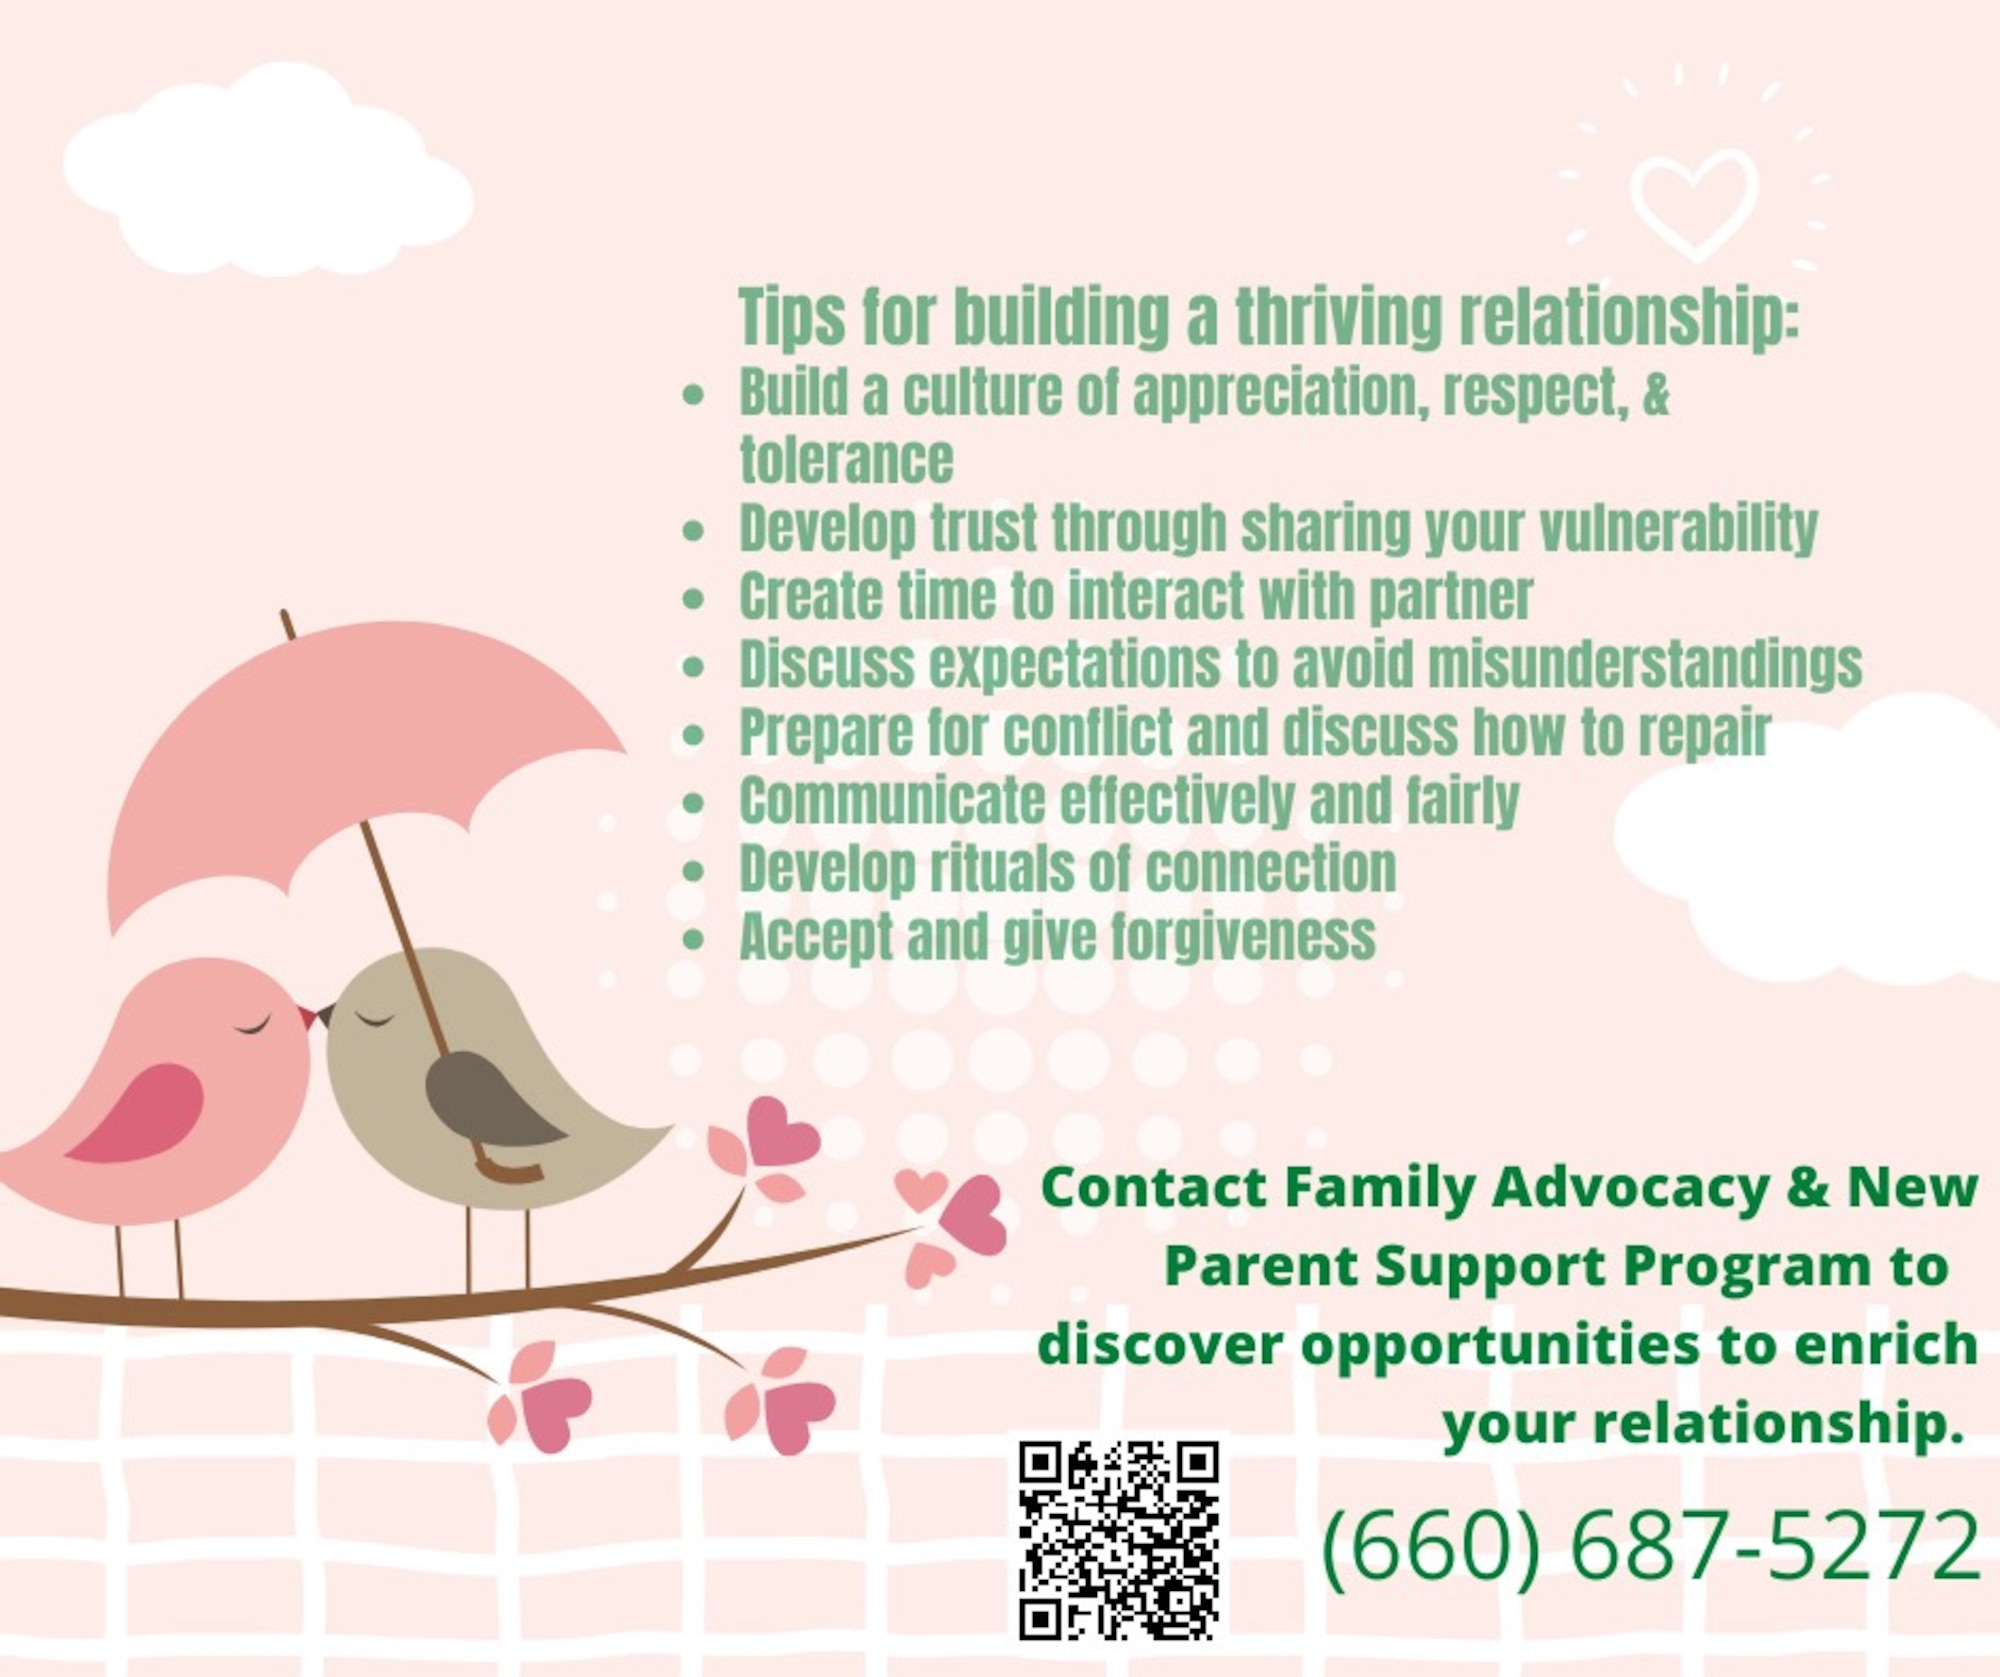 A graphic about tips for building a thriving relationship.